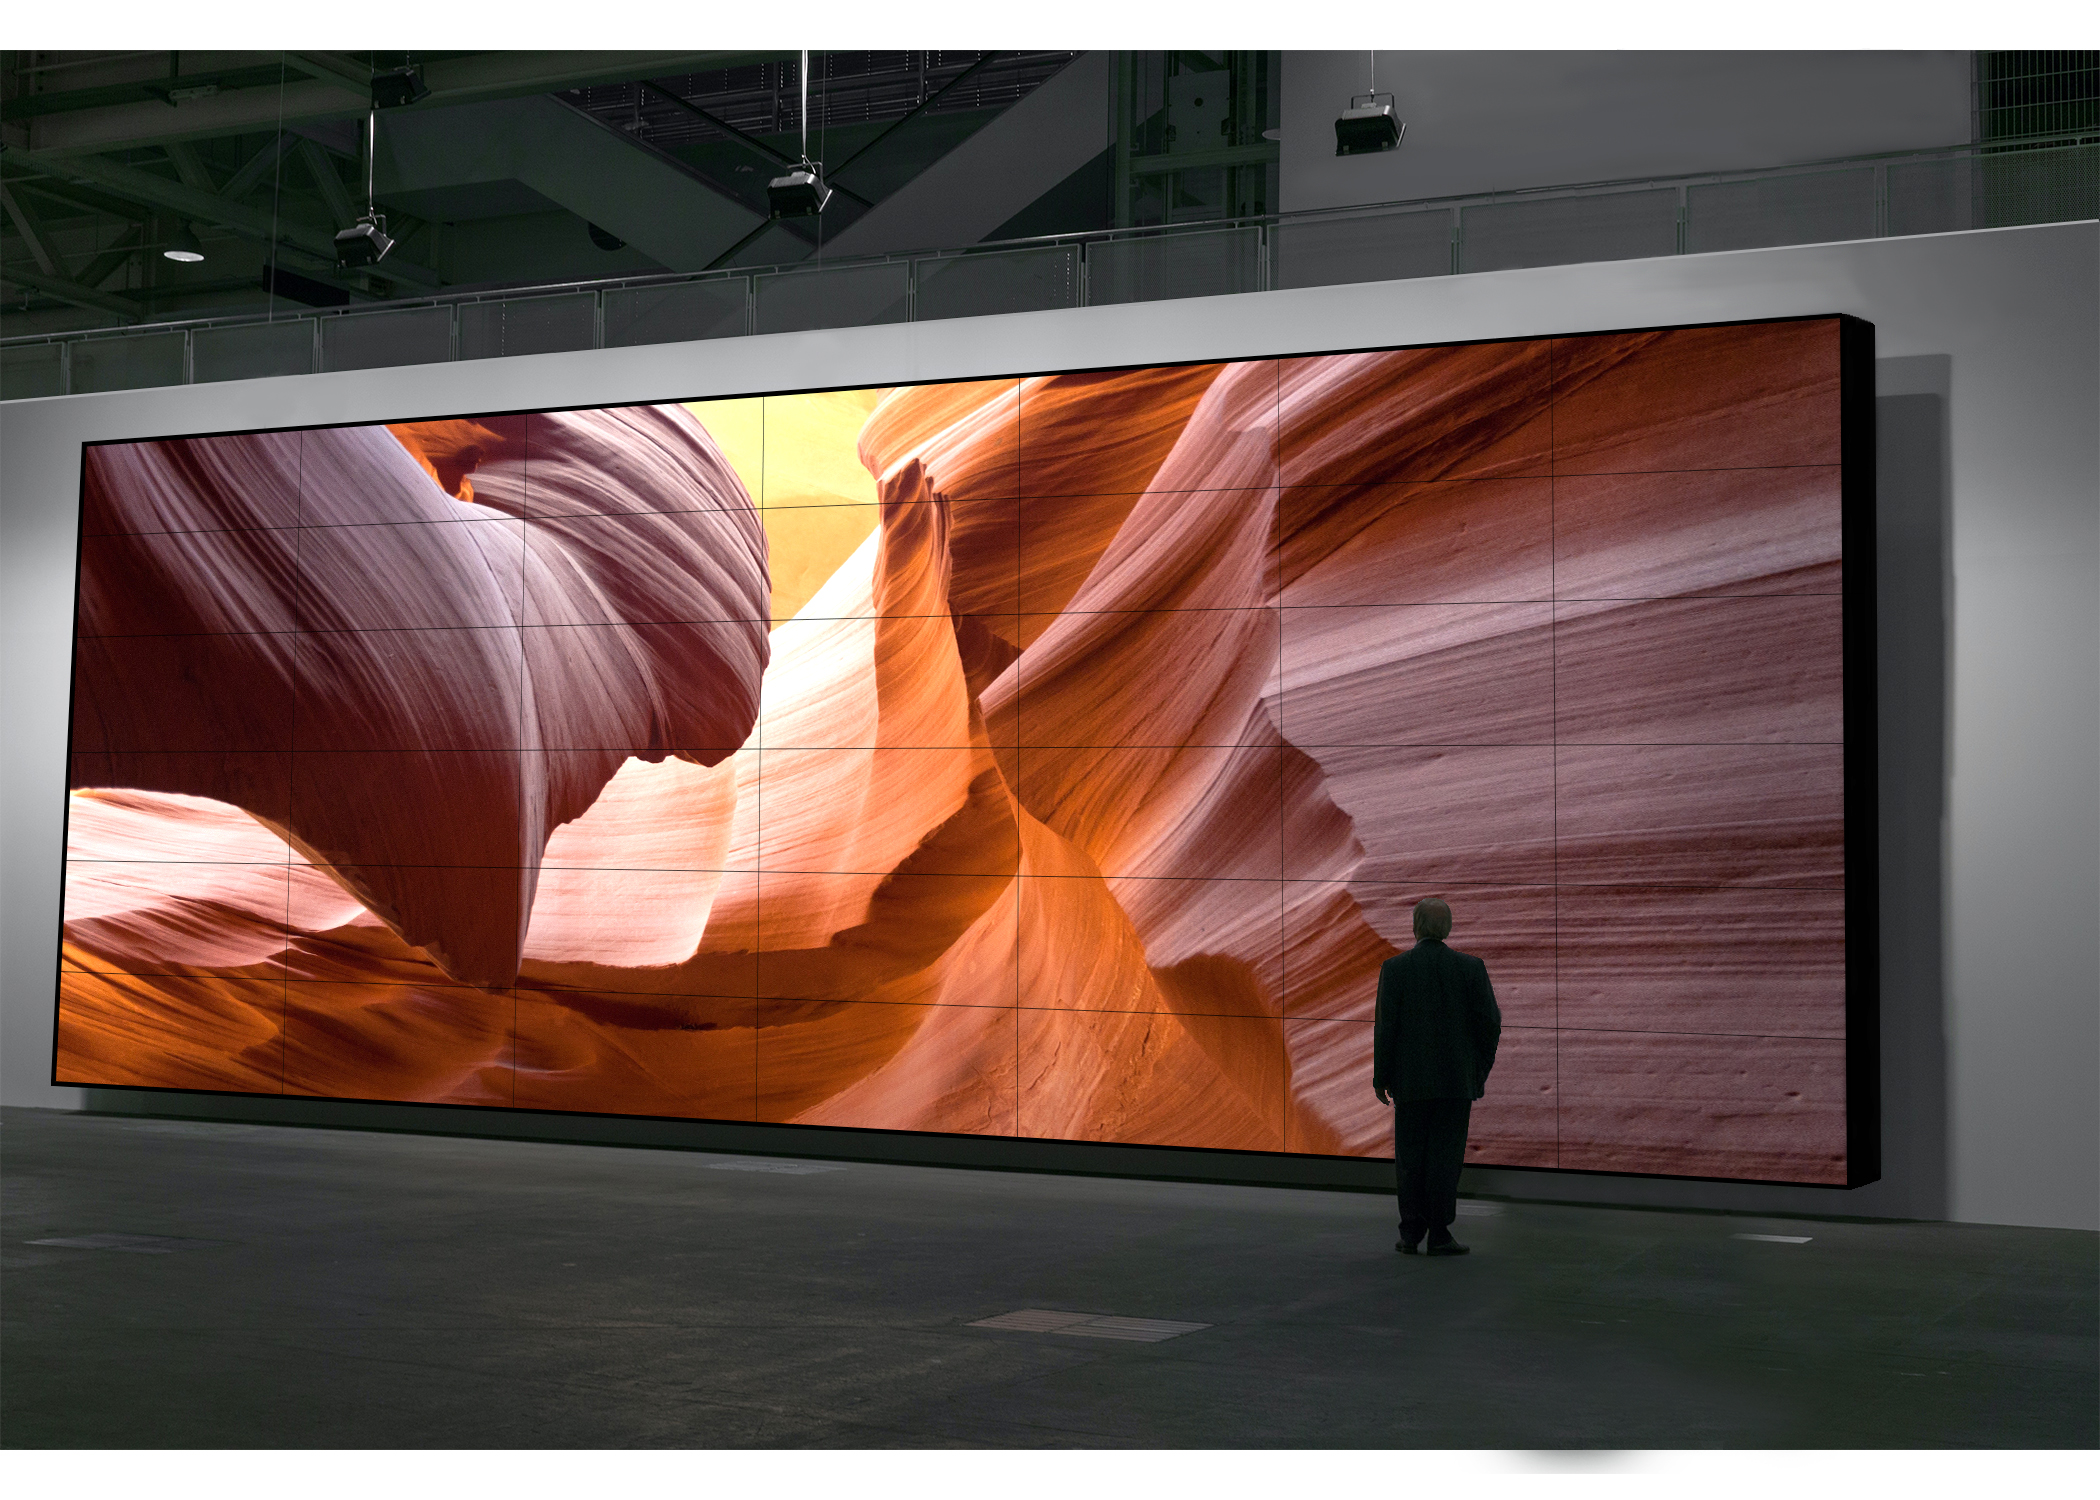 NEX-series 6x7 LCD Video Wall with a desert image